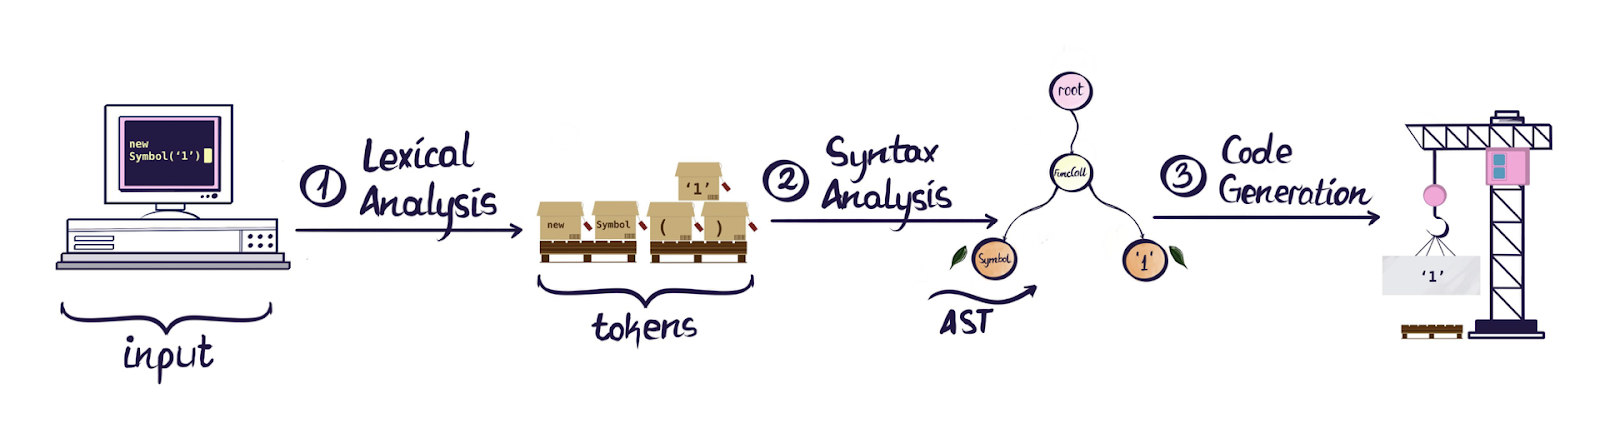 Diagram showing how input is transformed into tokens via Lexical Analysis and then into an AST through Syntax Analysis. Lastly it's transformed into output using Code Generation.